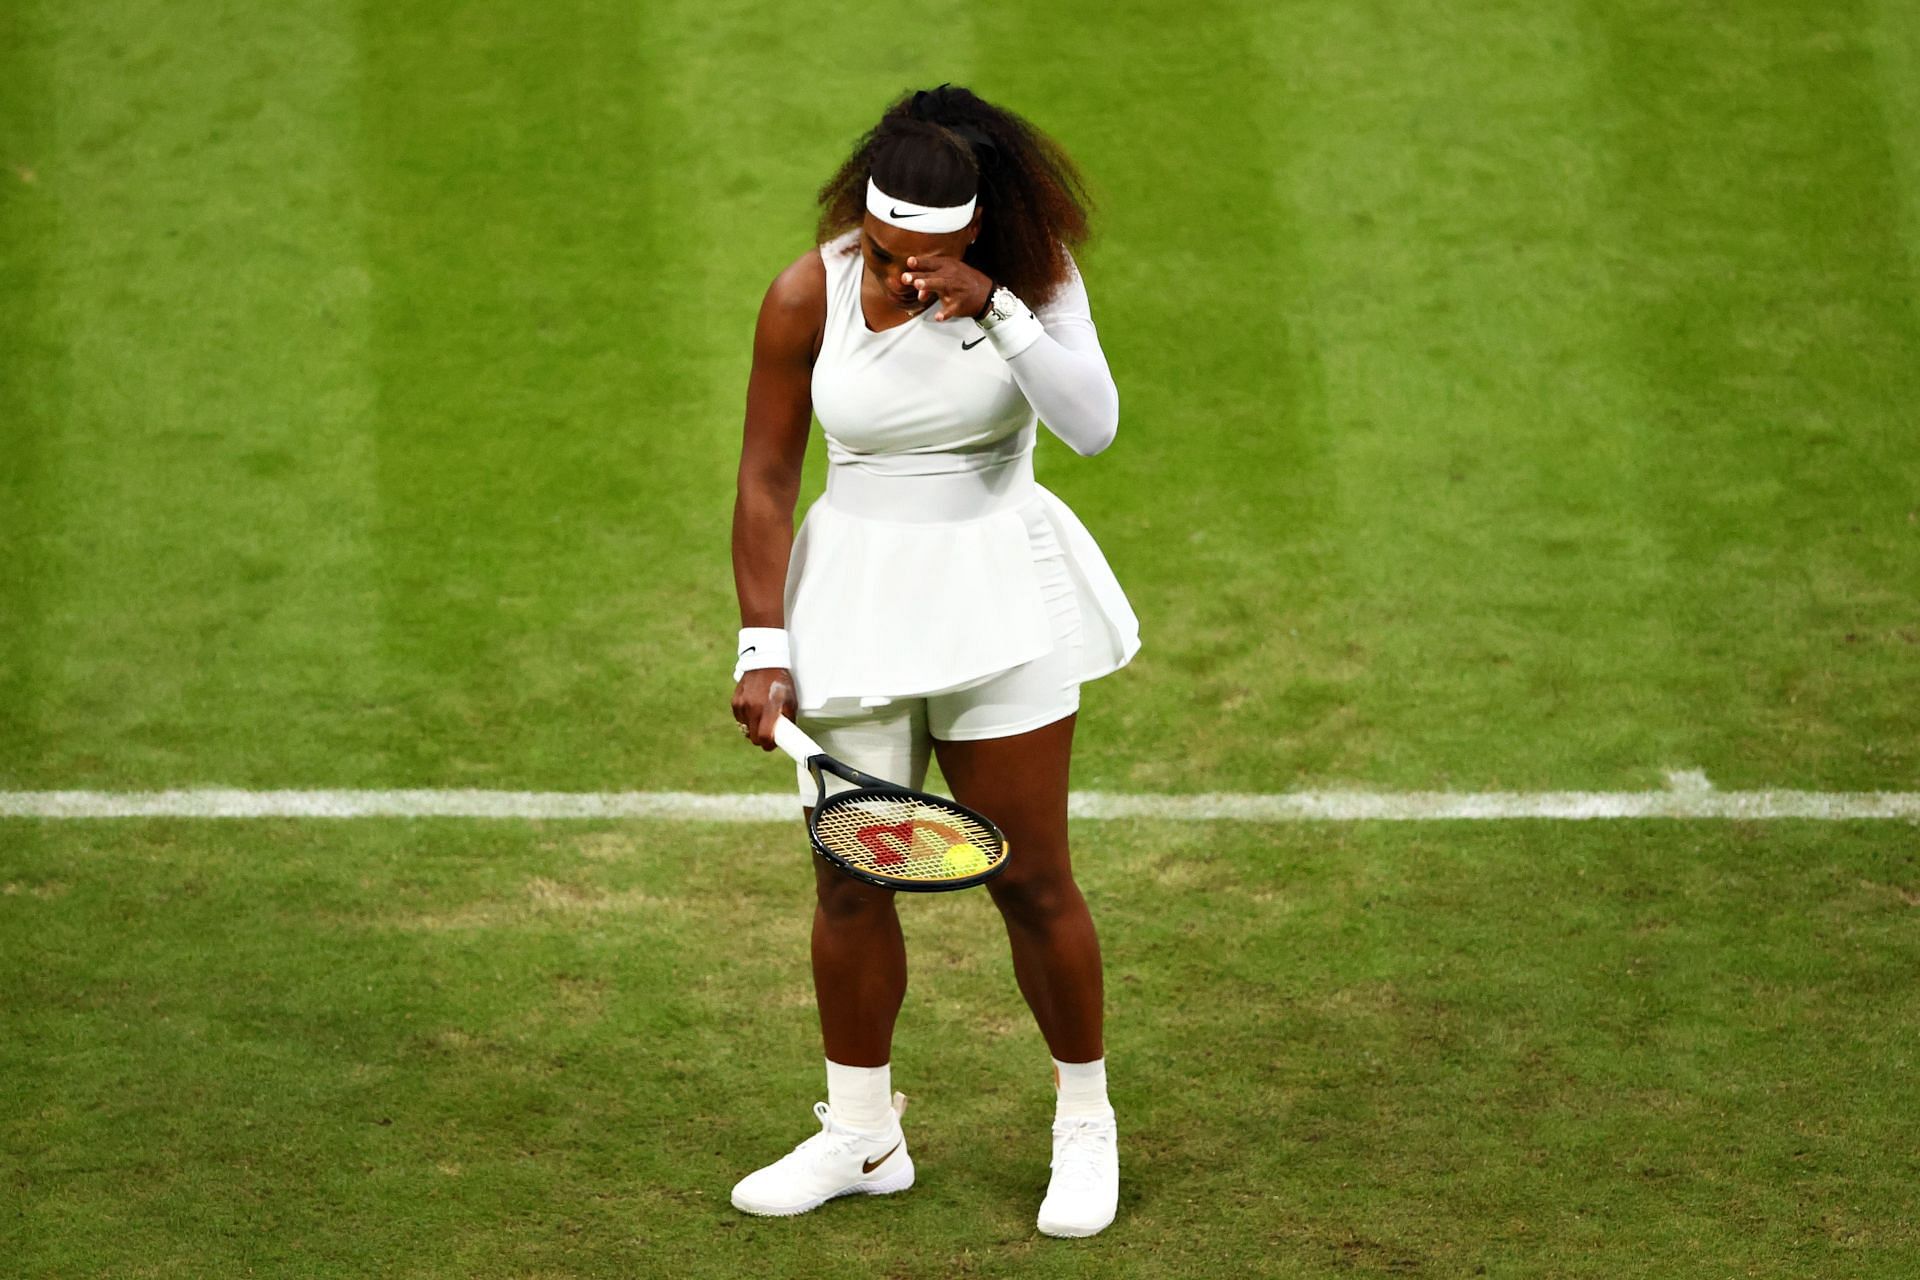 Williams last played a tennis match at Wimbledon in 2021